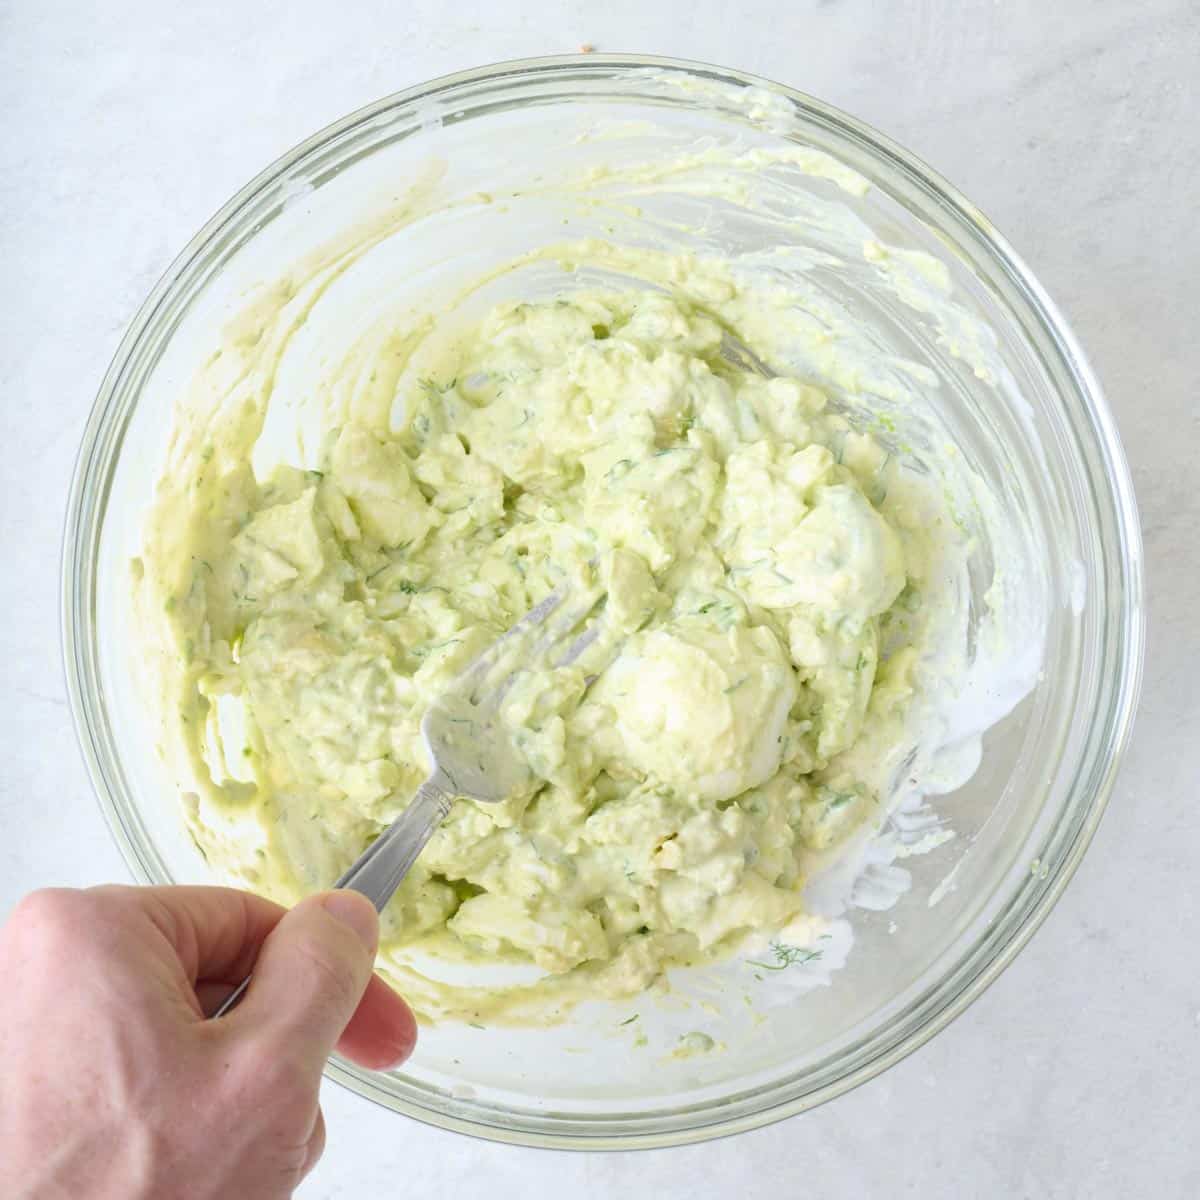 Fork mashing boiled eggs, avocado, and dressing together.